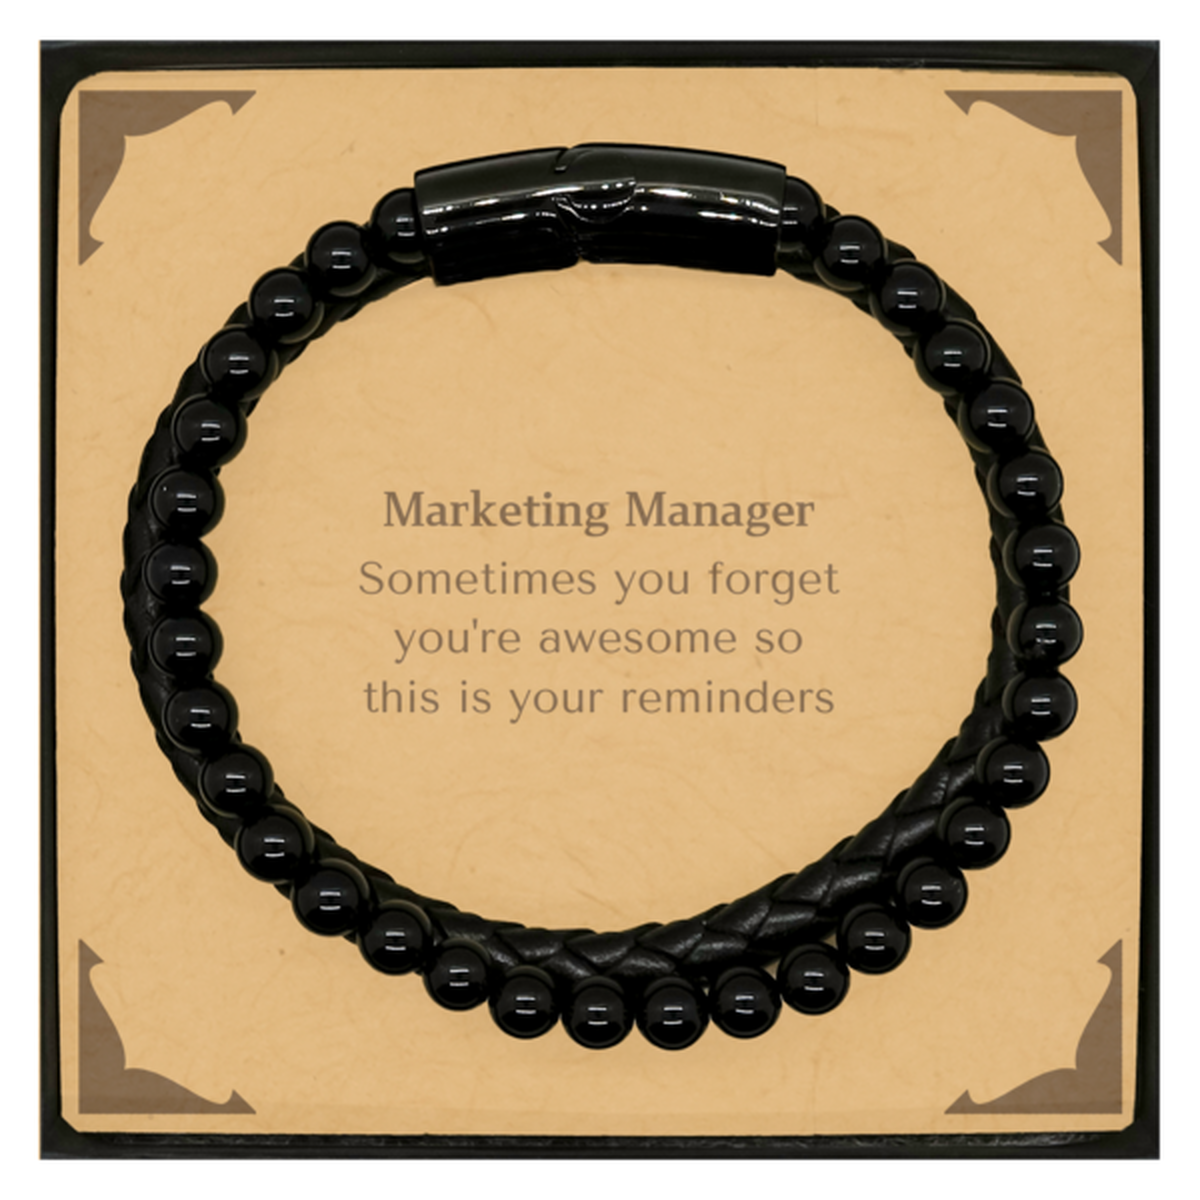 Sentimental Marketing Manager Stone Leather Bracelets, Marketing Manager Sometimes you forget you're awesome so this is your reminders, Graduation Christmas Birthday Gifts for Marketing Manager, Men, Women, Coworkers